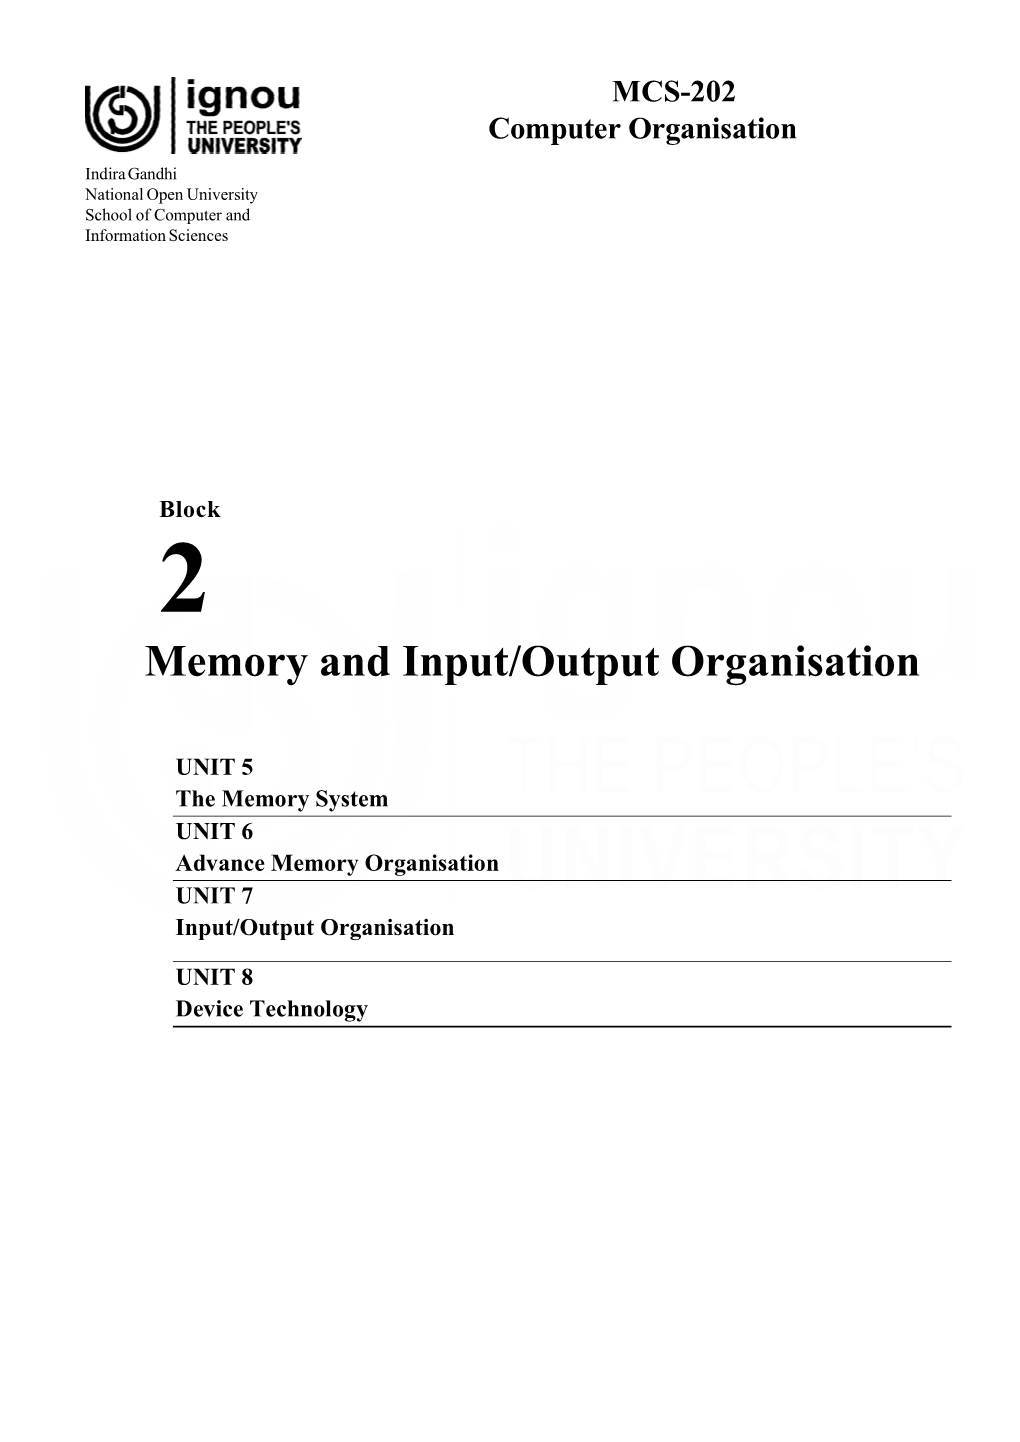 Memory and Input/Output Organisation